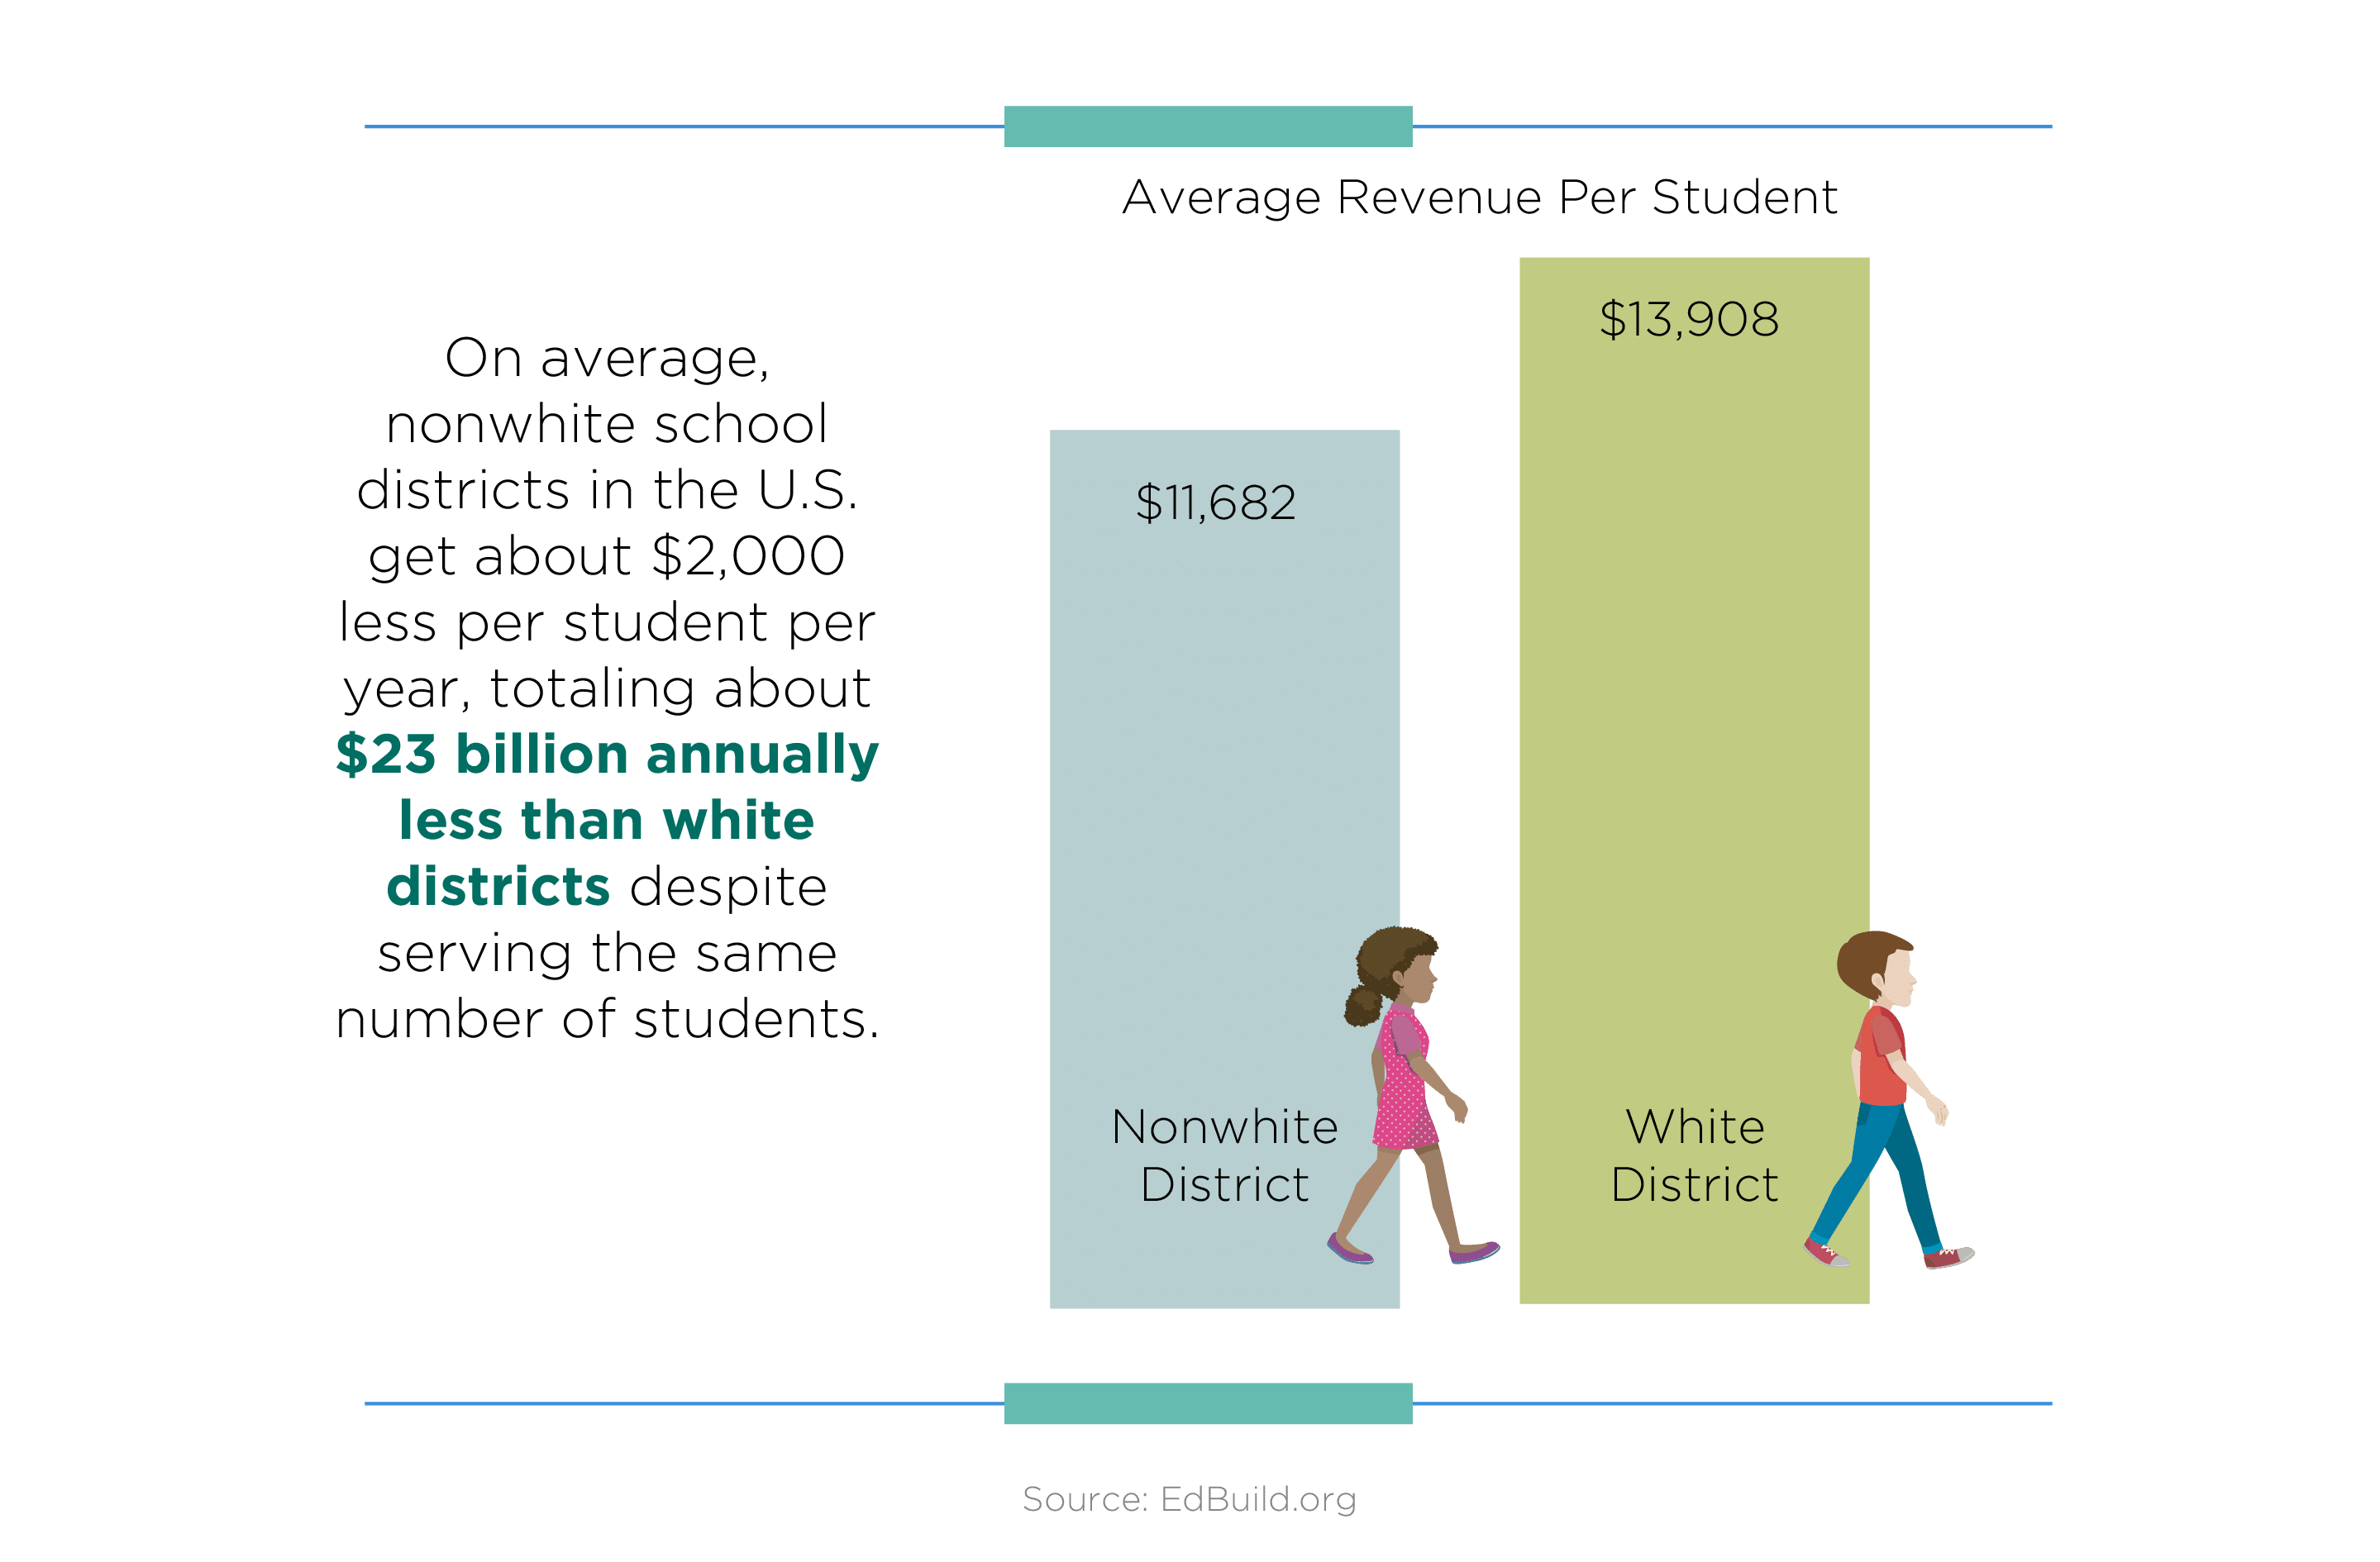 On average, nonwhite school districts in the U.S. get about $2000 less per student per year, totaling about $24 billion annually less than white districts despite serving the same number of students.